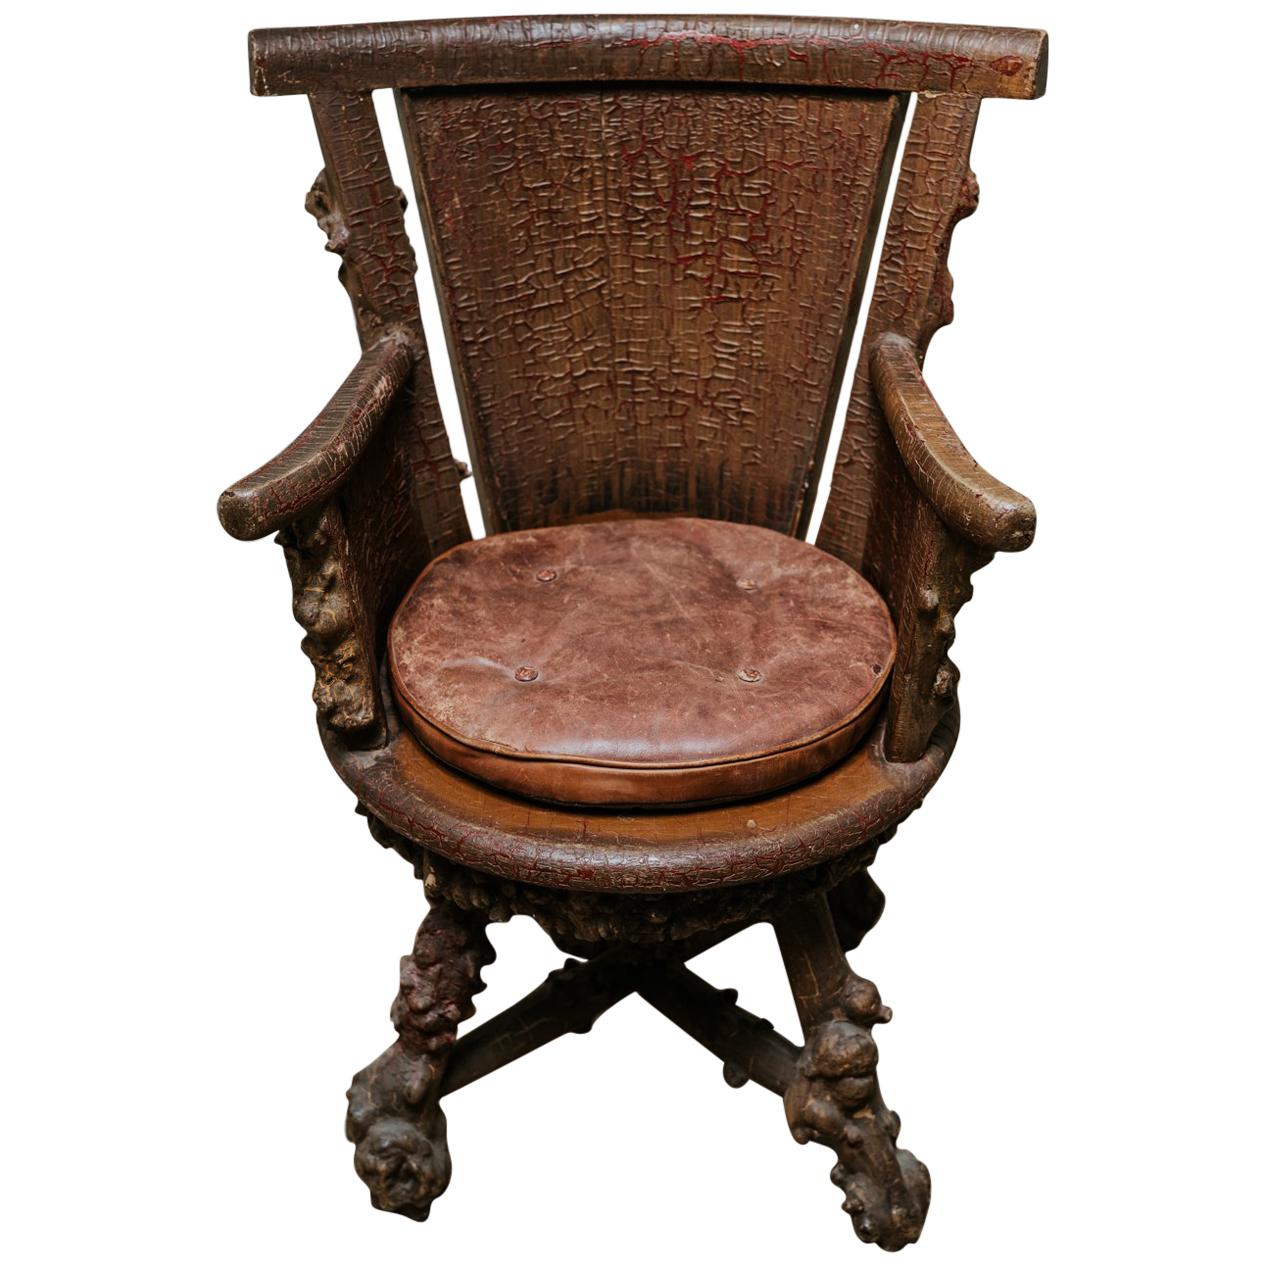 Rusticated Timber Revolving Desk Chair